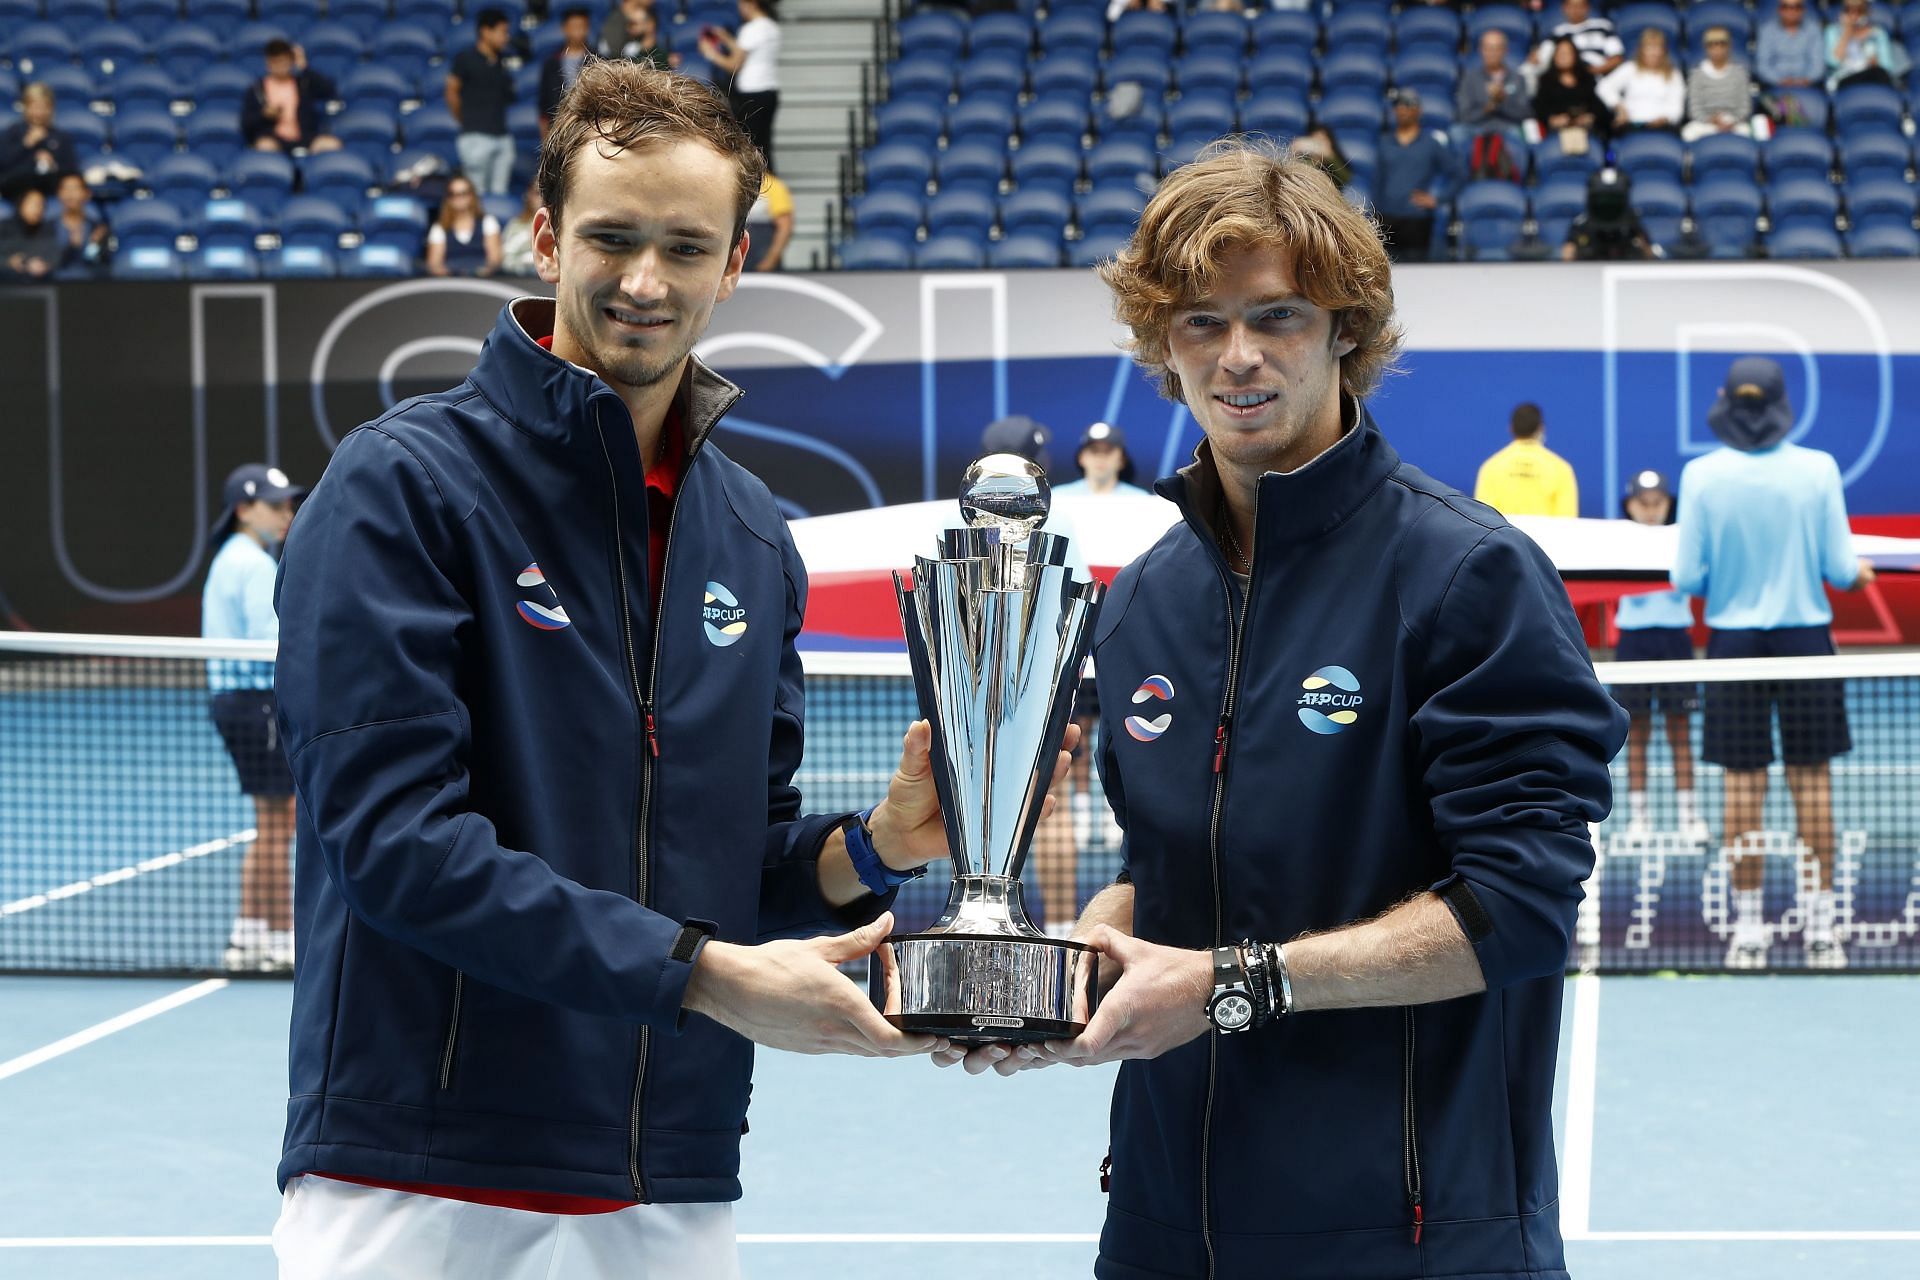 Andrey Rublev and Daniil Medvedev at the 2021 ATP Cup